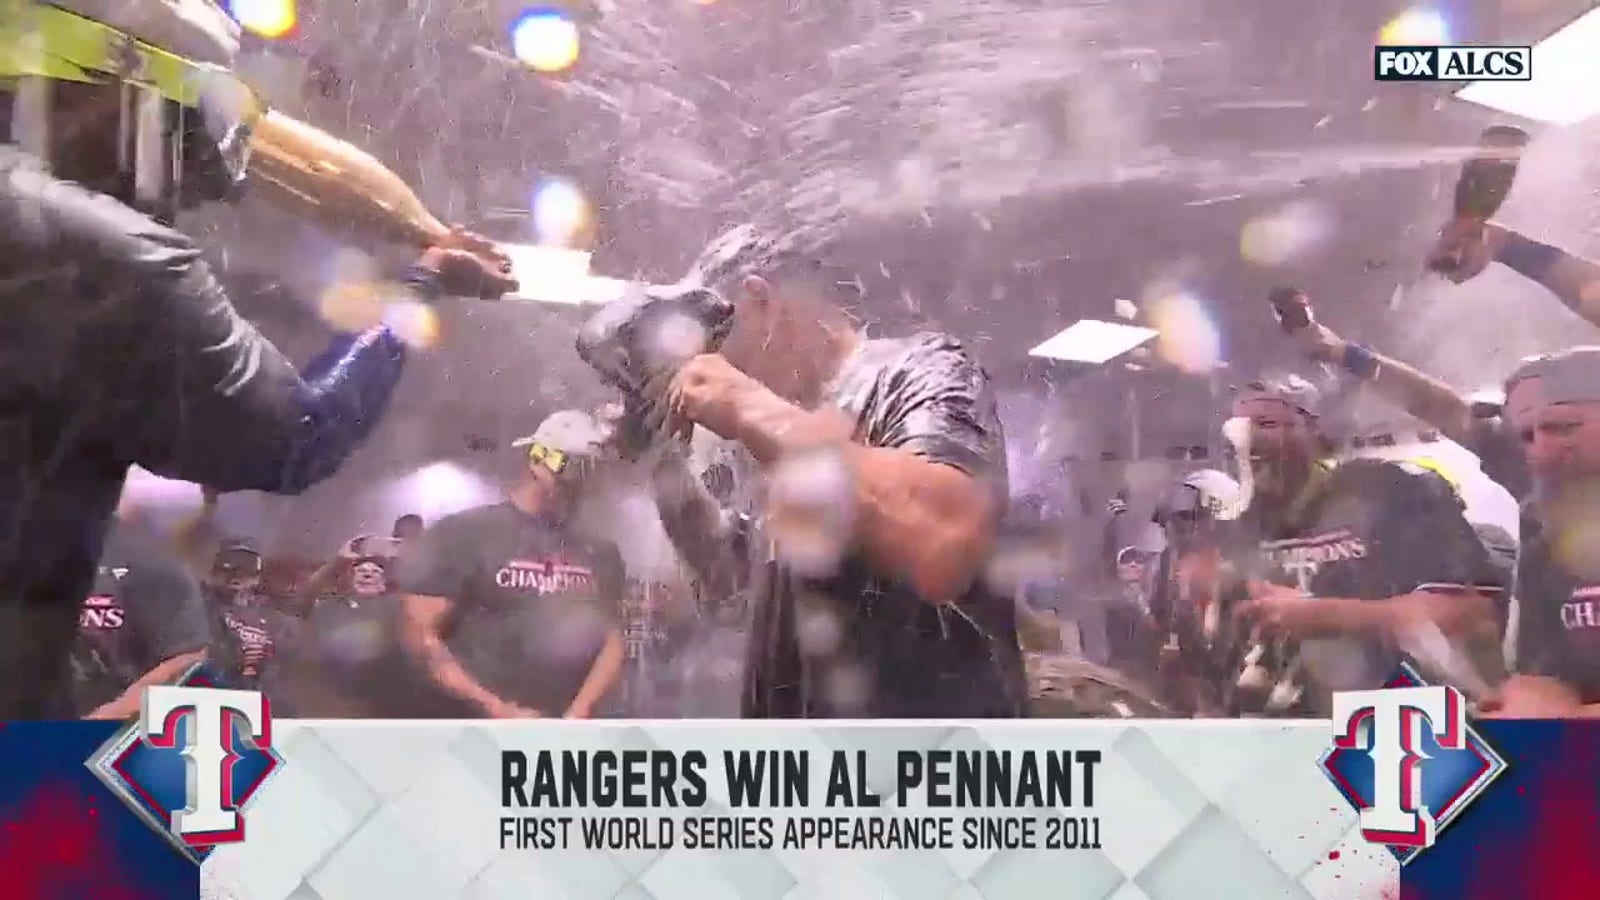 Rangers' epic locker room celebration after defeating Astros in ALCS